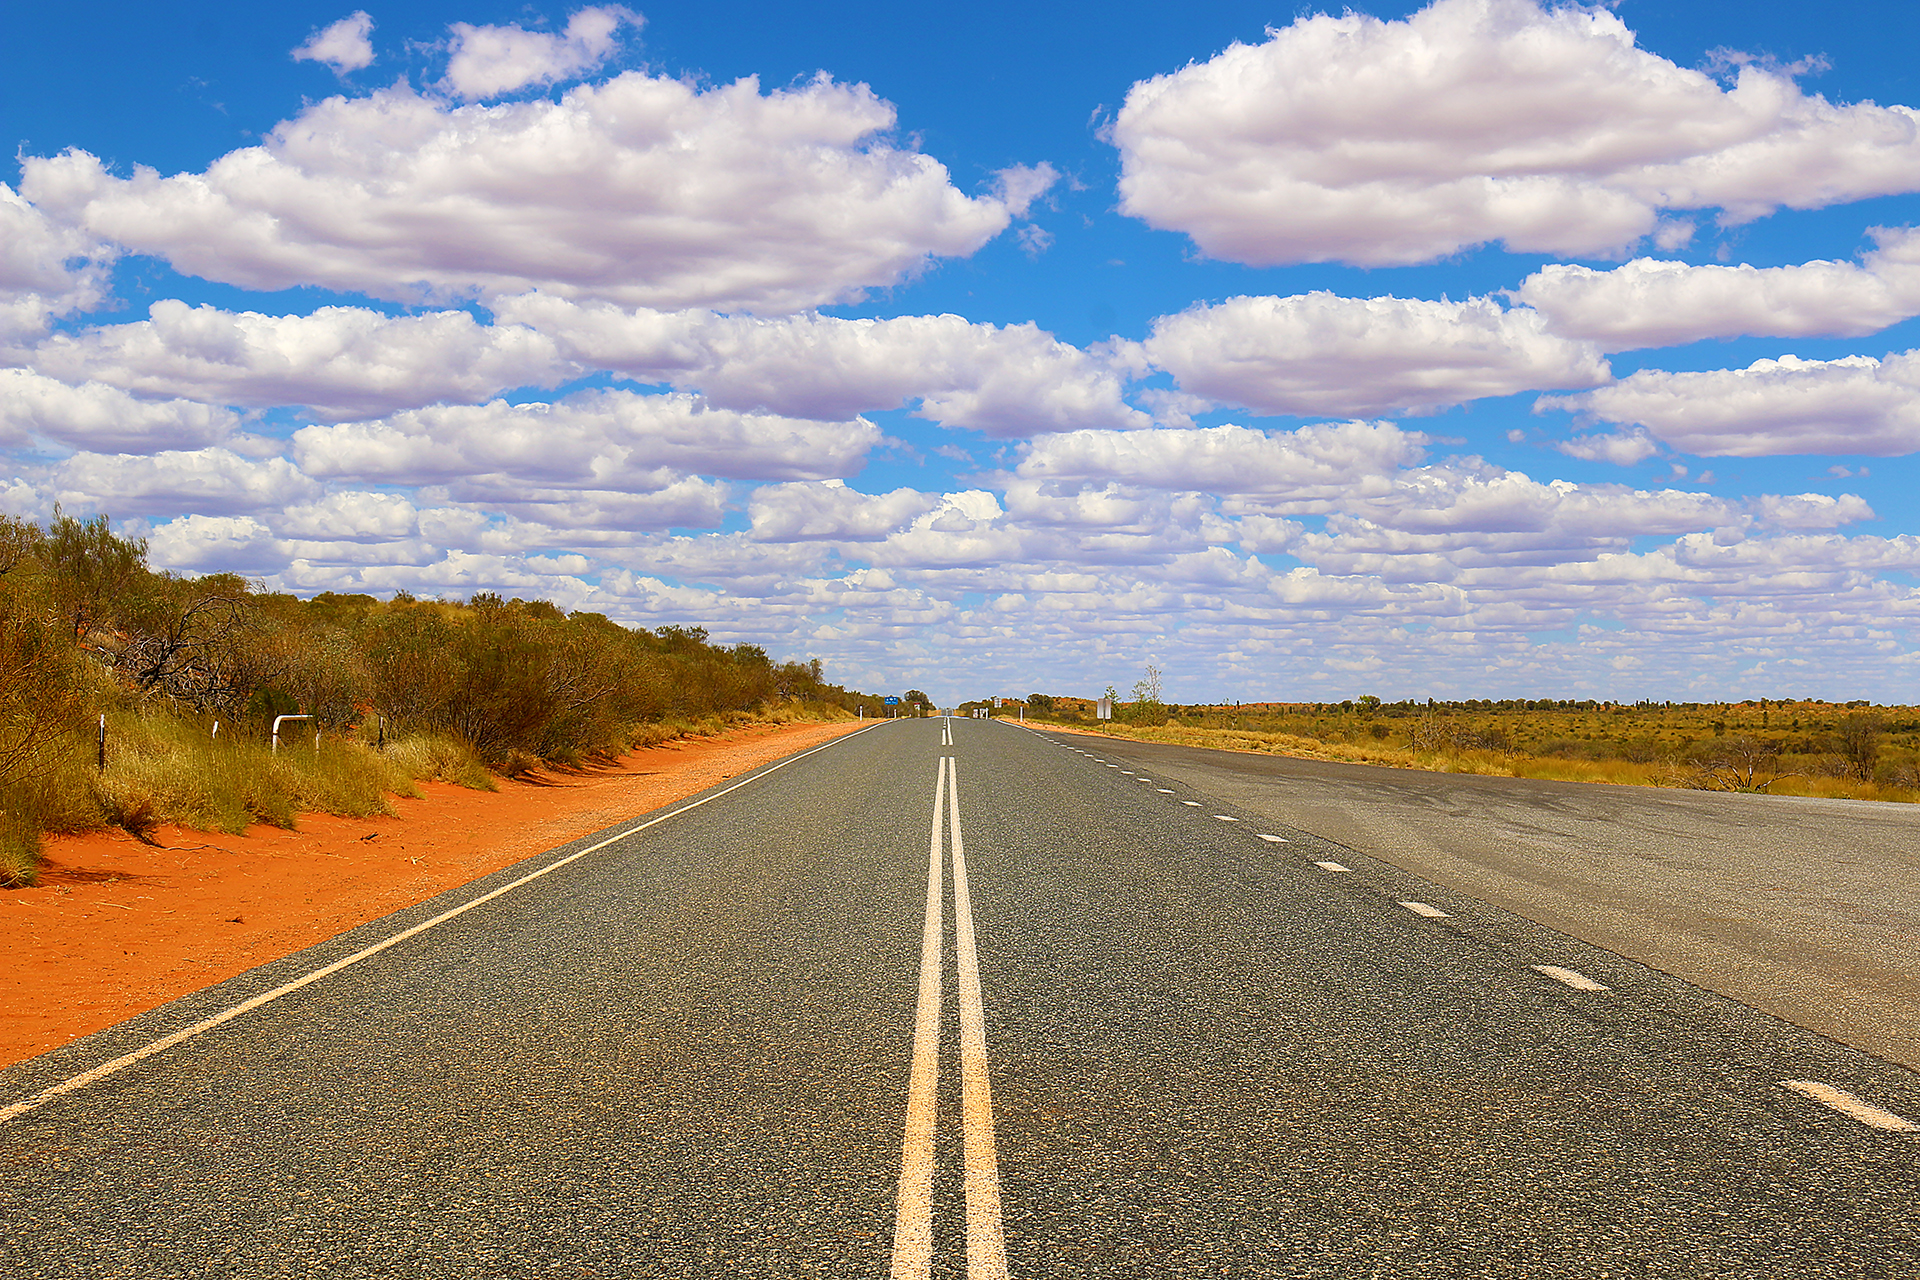 a road with a white line on the side with Nullarbor Plain in the background